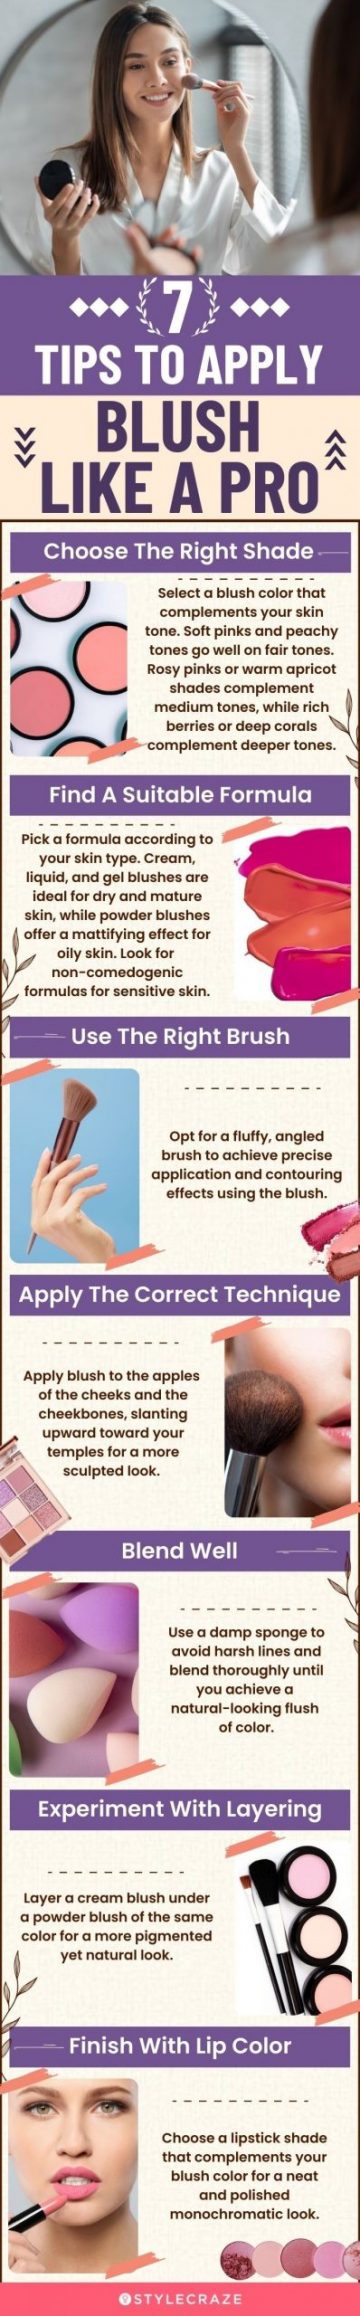 7 Tips To Apply Blush Like A Pro (infographic)